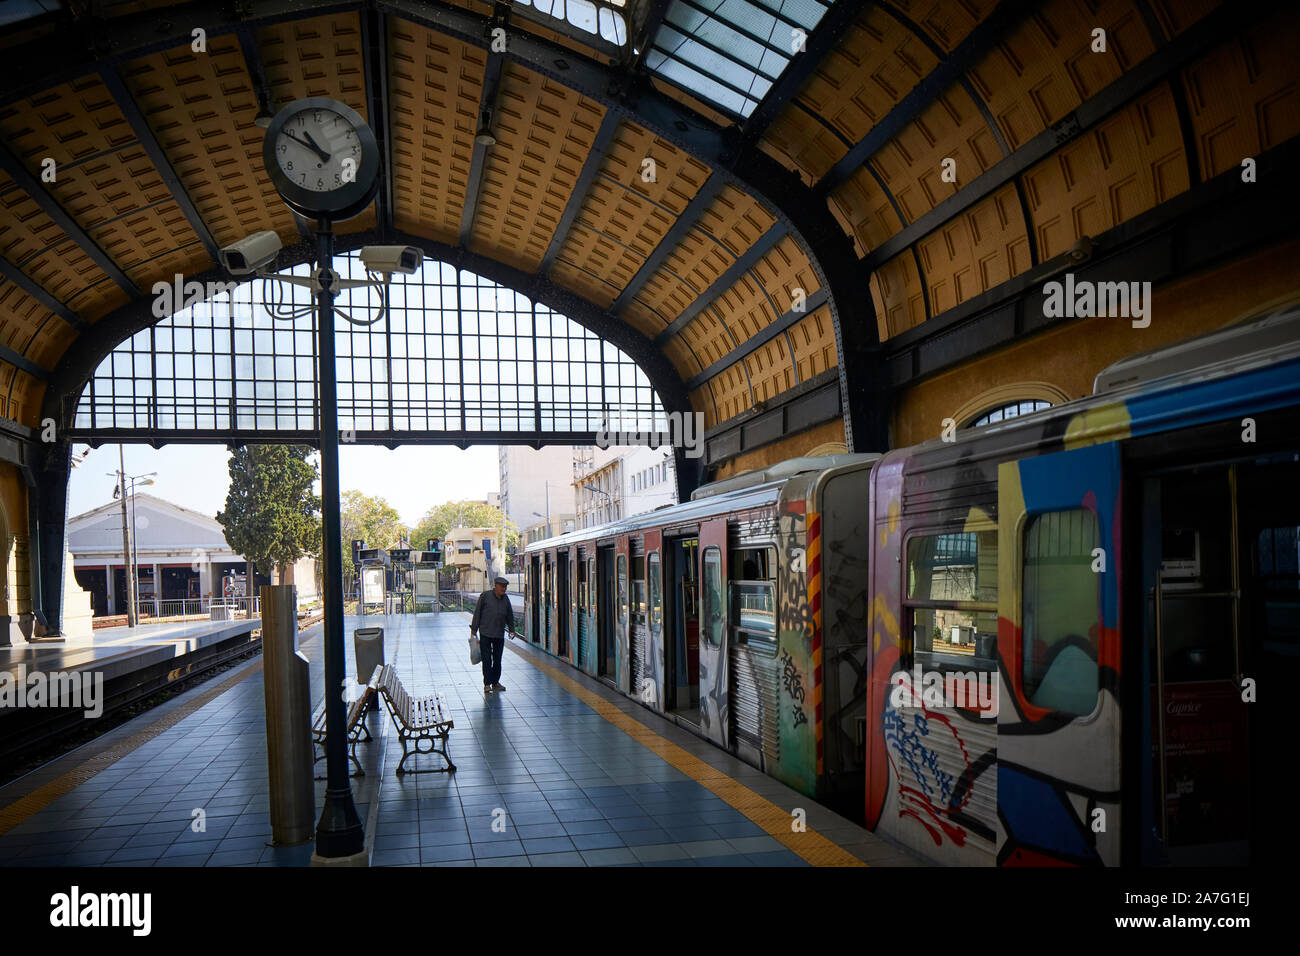 Piraeus port city Greece underground metro terminus of Athens Metro Line 1 a graffiti covers train departs under he ornate station shed roof Stock Photo